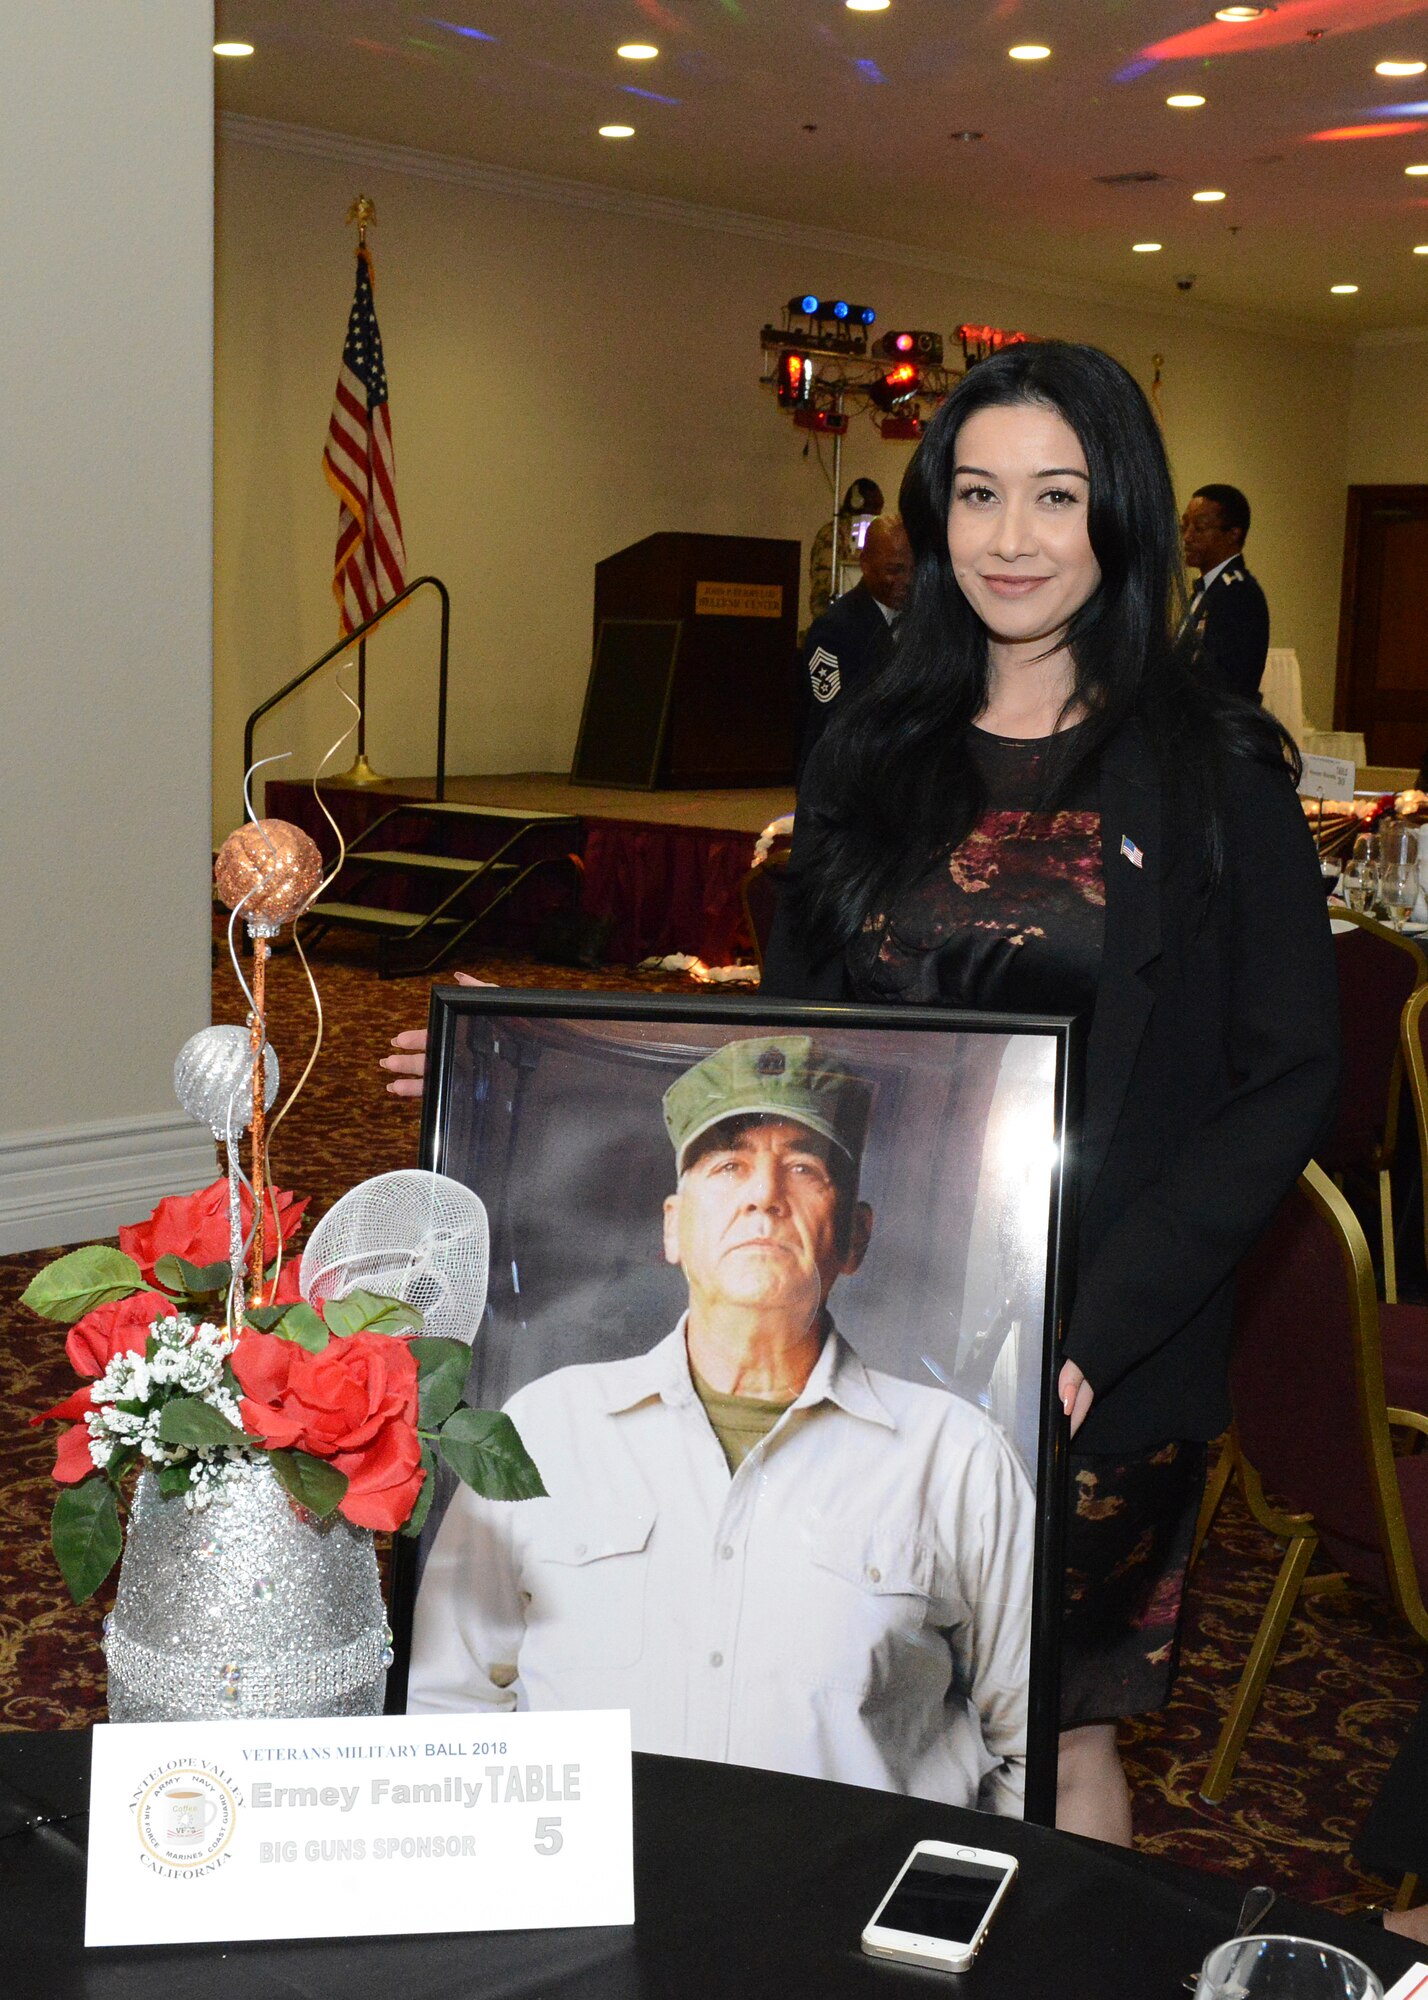 Betty Ermey, daughter of renowned actor and television personality R. Lee. Ermey, poses for a photo along with a picture of her late father at the Coffee4Vets Veterans Military Ball at the John P. Eliopulos Hellenic Center in Lancaster, California, Nov. 3. Betty Ermey spoke about her appreciation for military veterans at the event. (U.S. Air Force photo by Kenji Thuloweit)